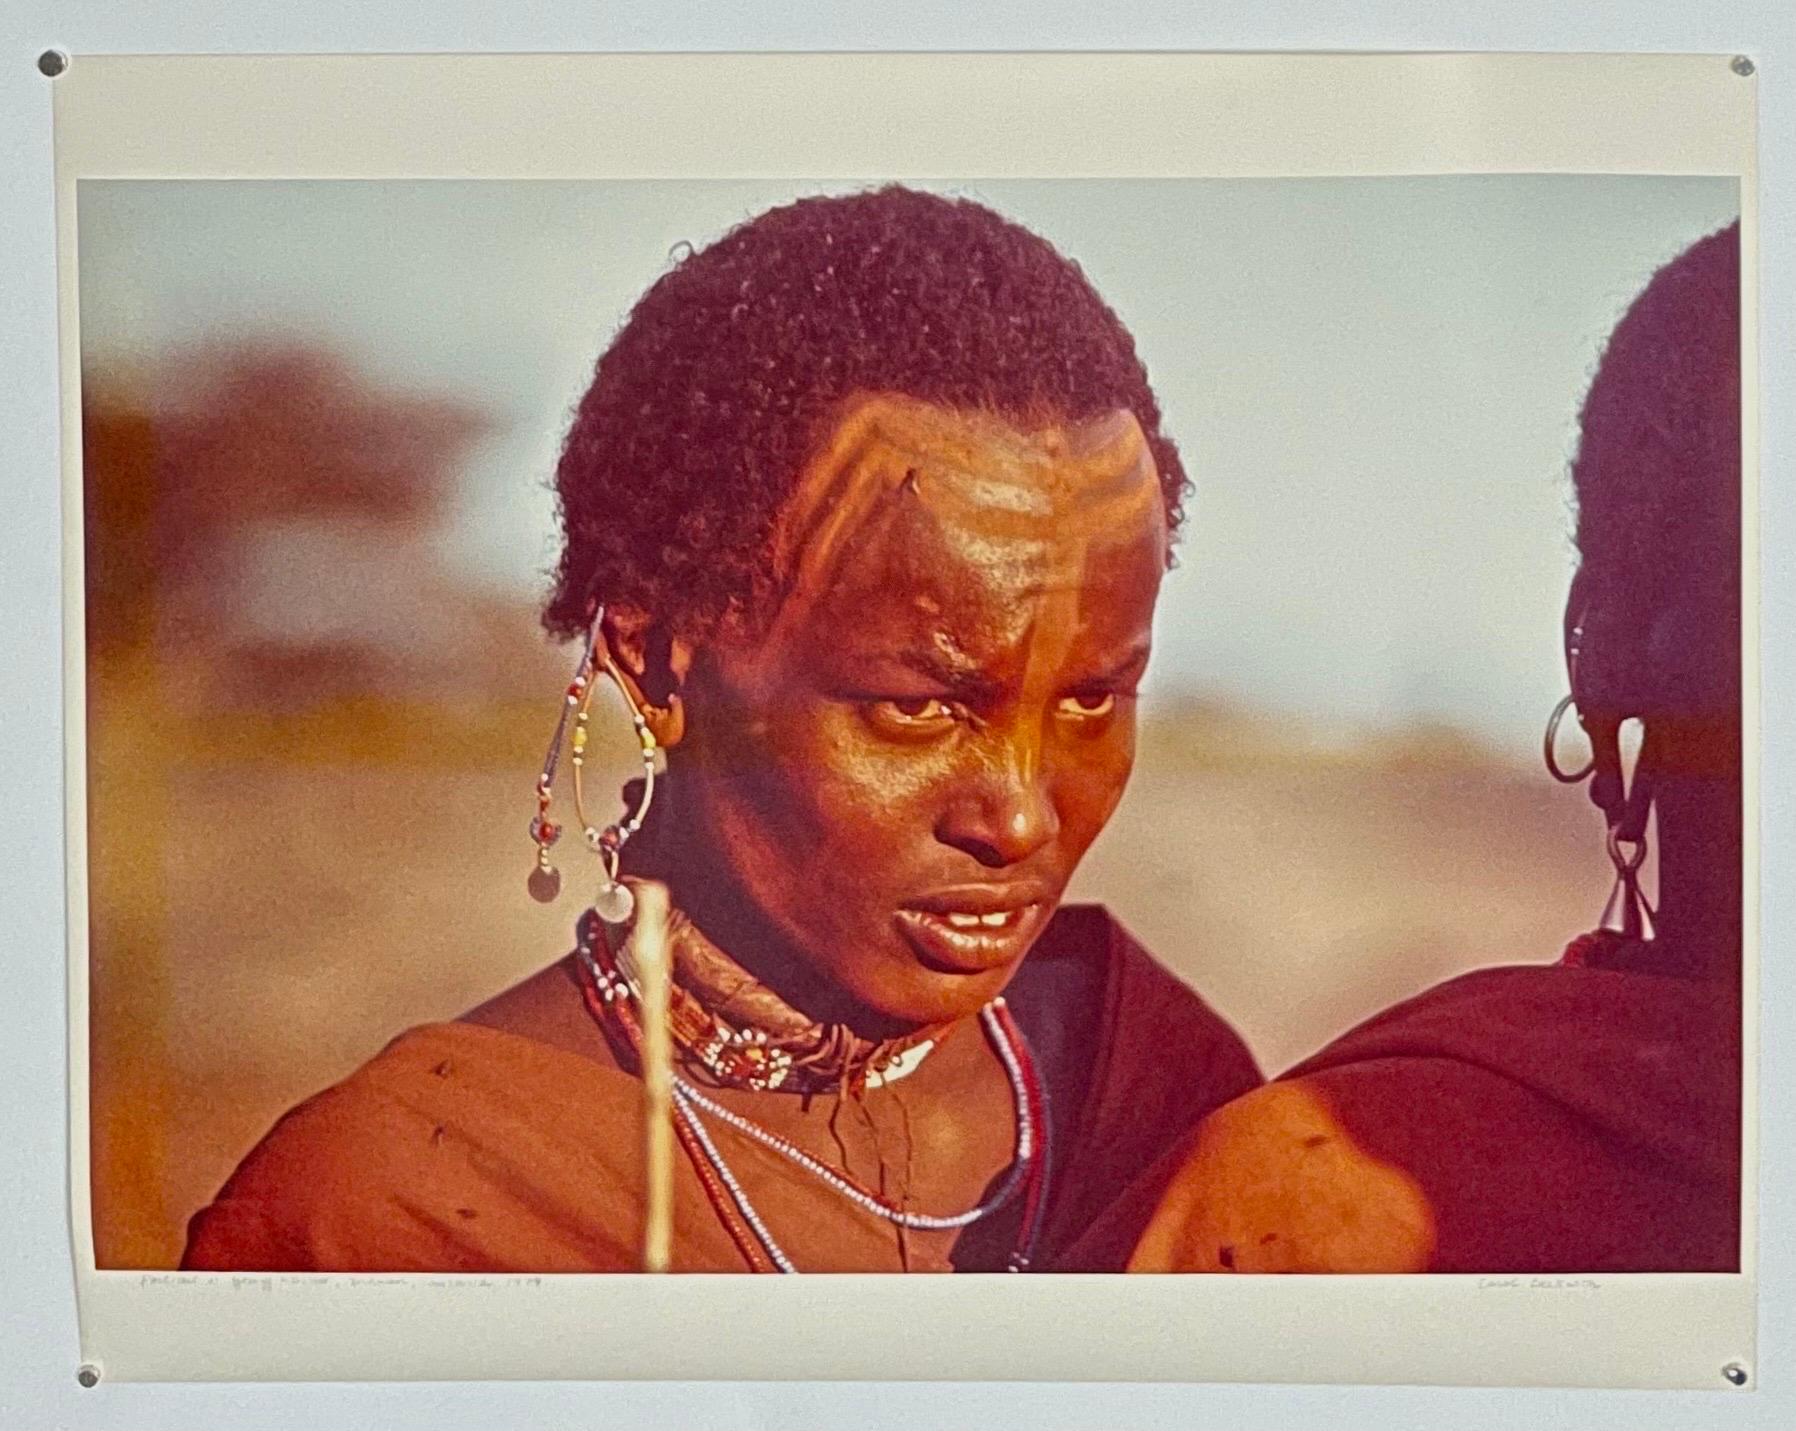 Carol Beckwith,  (American, b. 1945), 
Maasai Portrait
Chromogenic print on paper, from Beckwith's book 